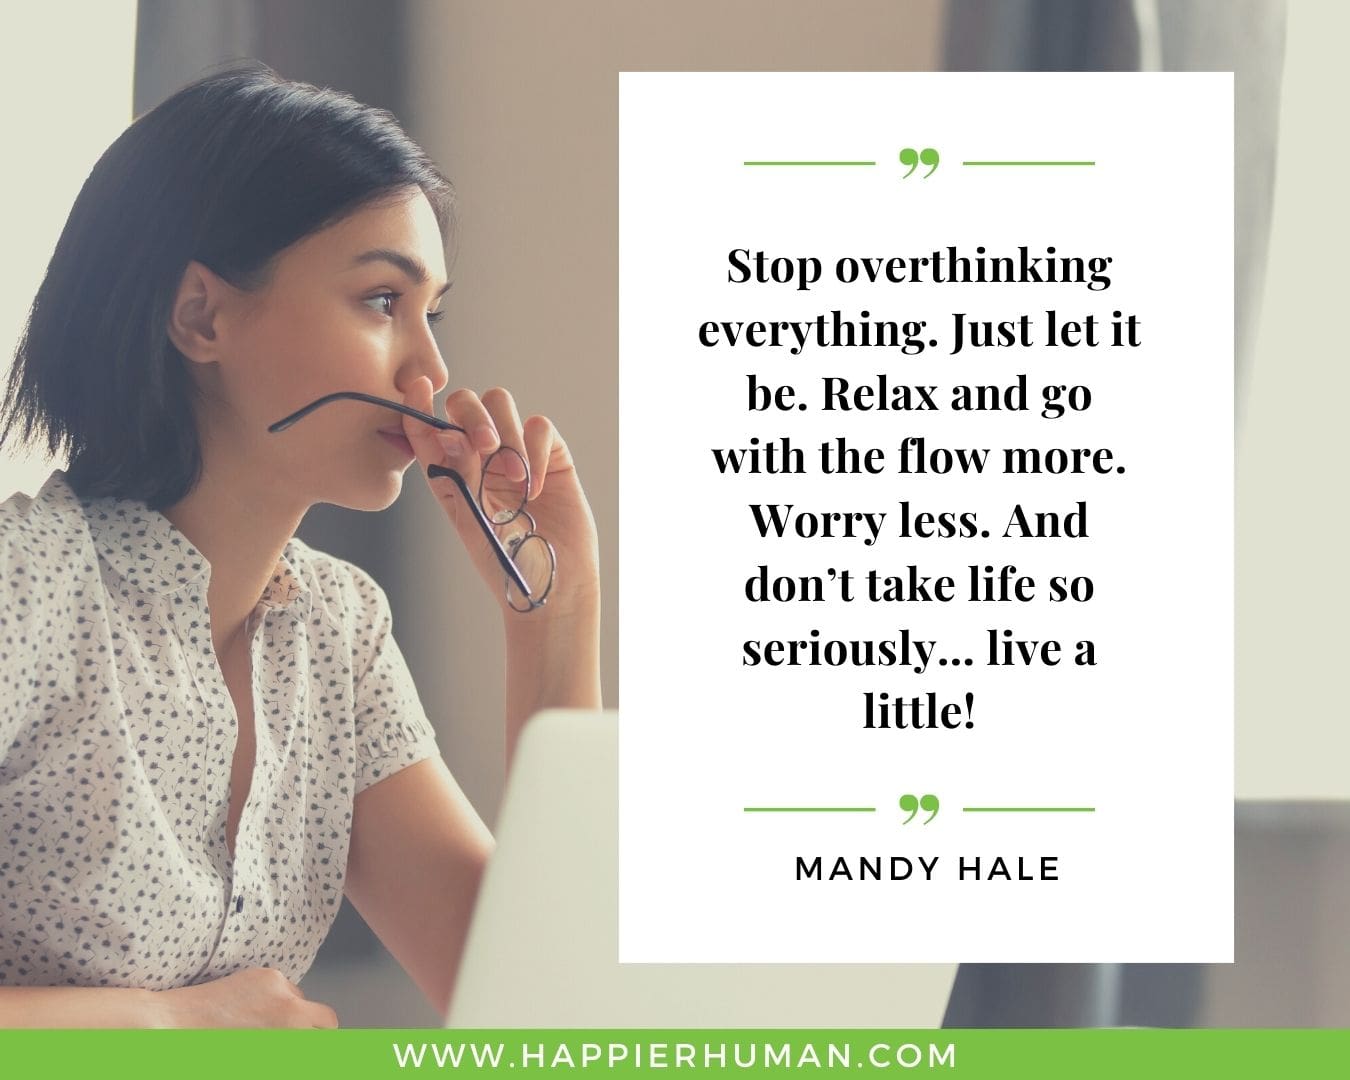 Overthinking Quotes - “Stop overthinking everything. Just let it be. Relax and go with the flow more. Worry less. And don’t take life so seriously… live a little!” - Mandy Hale